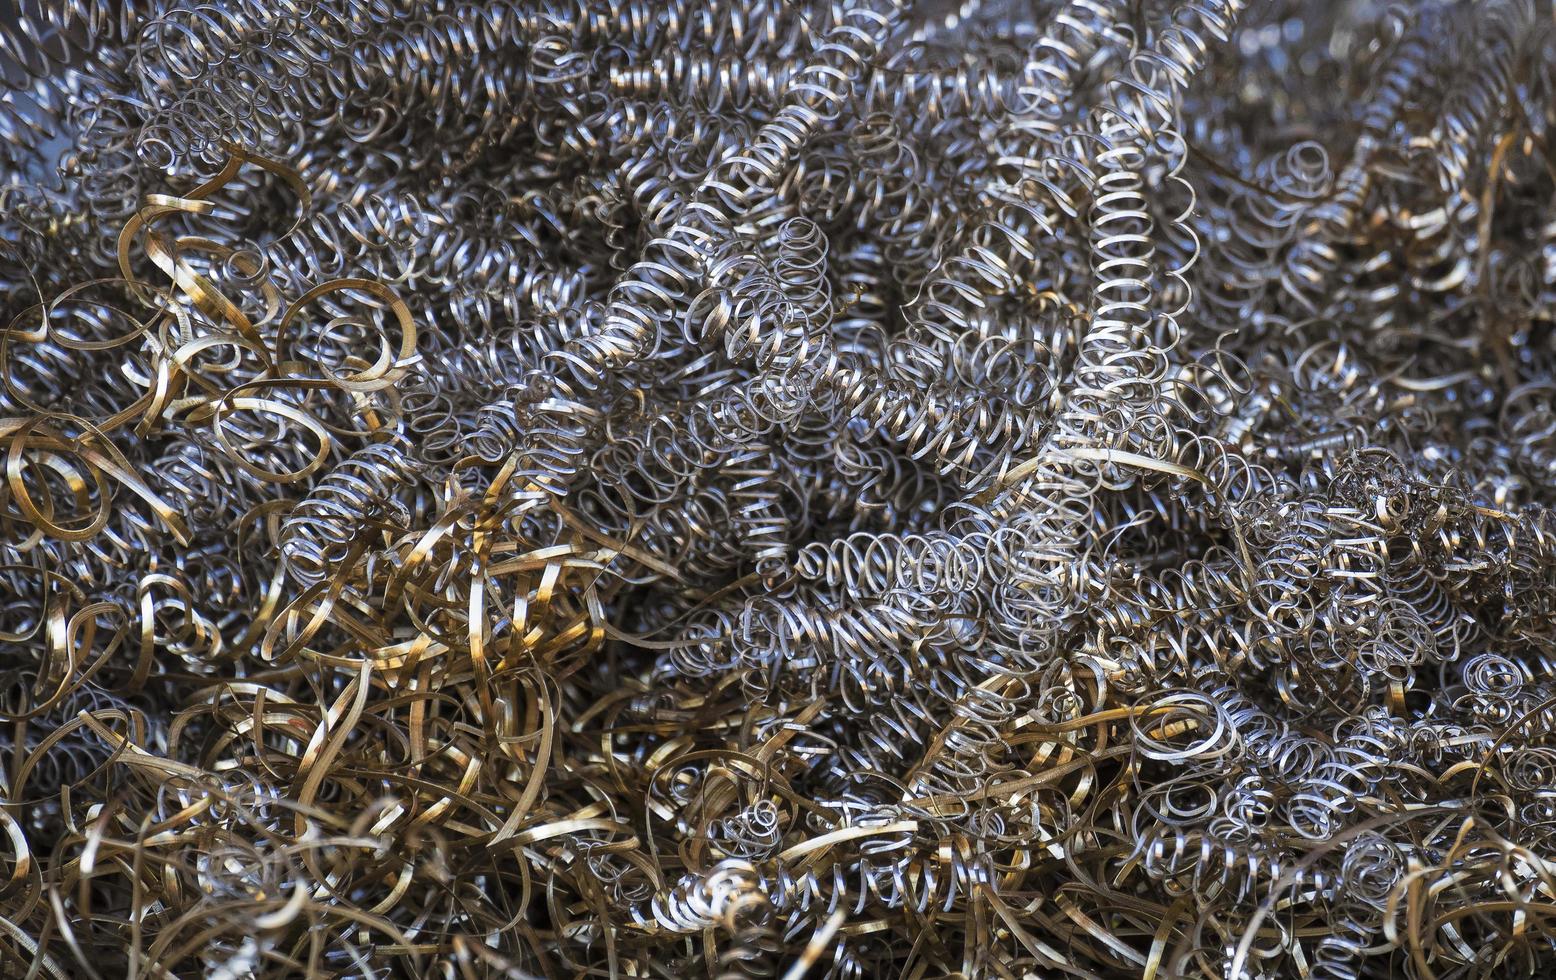 Background image of scrap brass and metal shavings for recycling photo